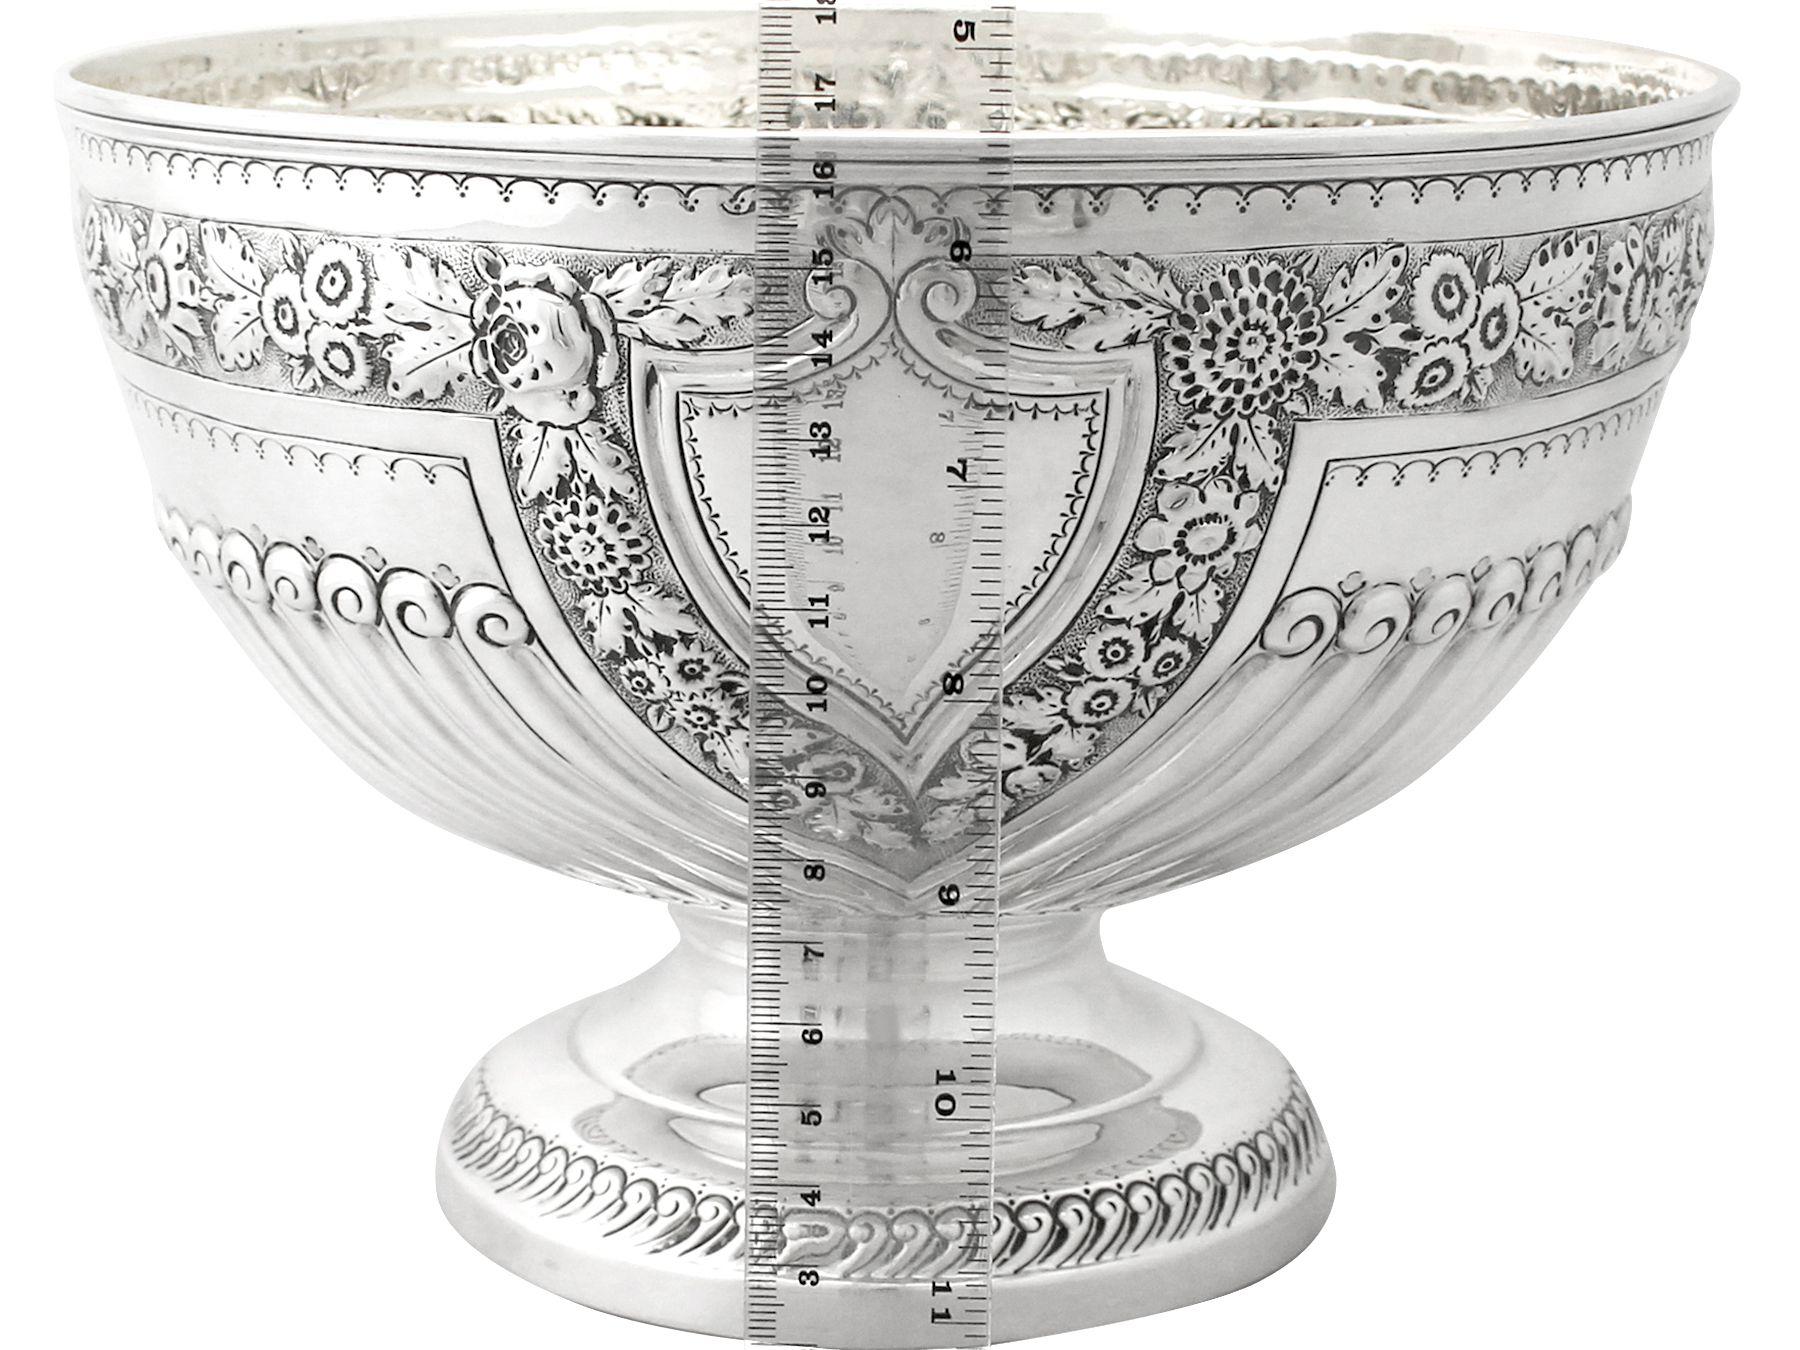 Antique Victorian Sterling Silver Presentation Bowl by Josiah Williams & Co For Sale 3